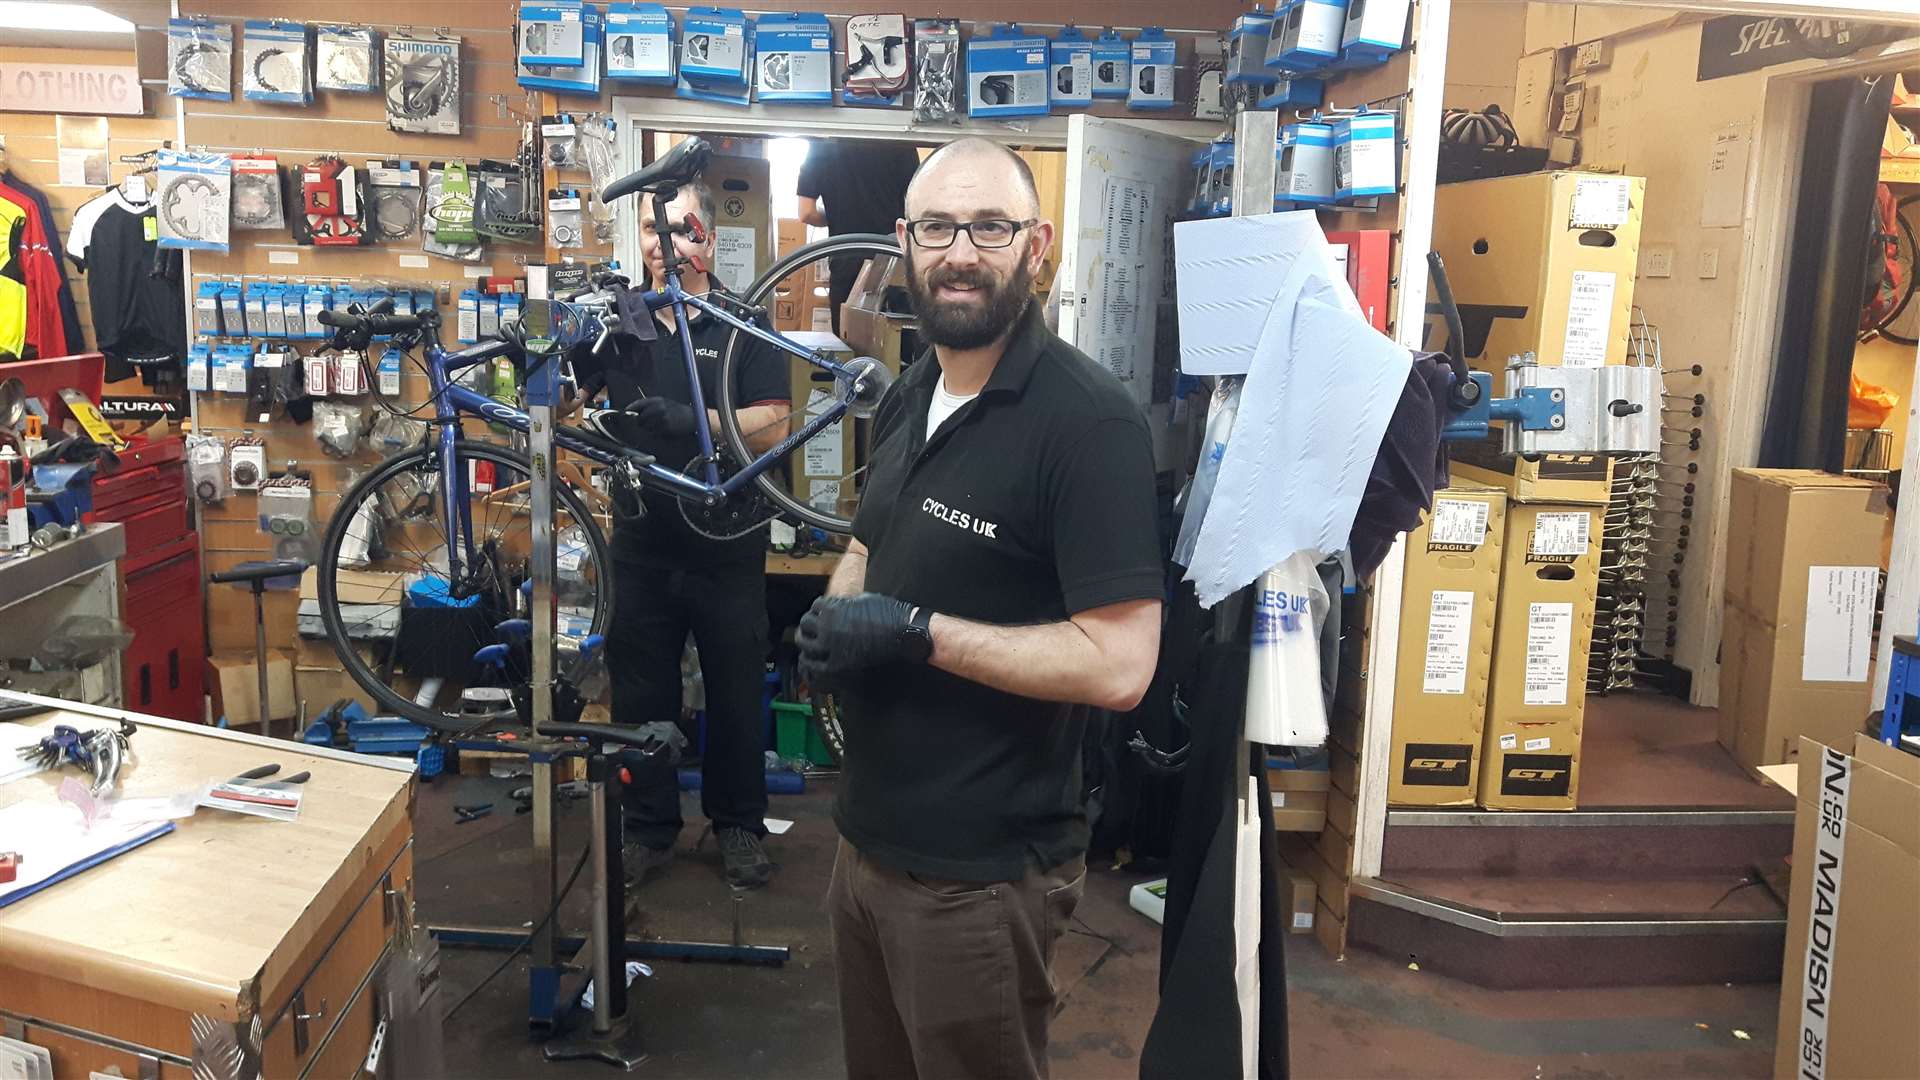 Cycles UK store manager Dean Brooks